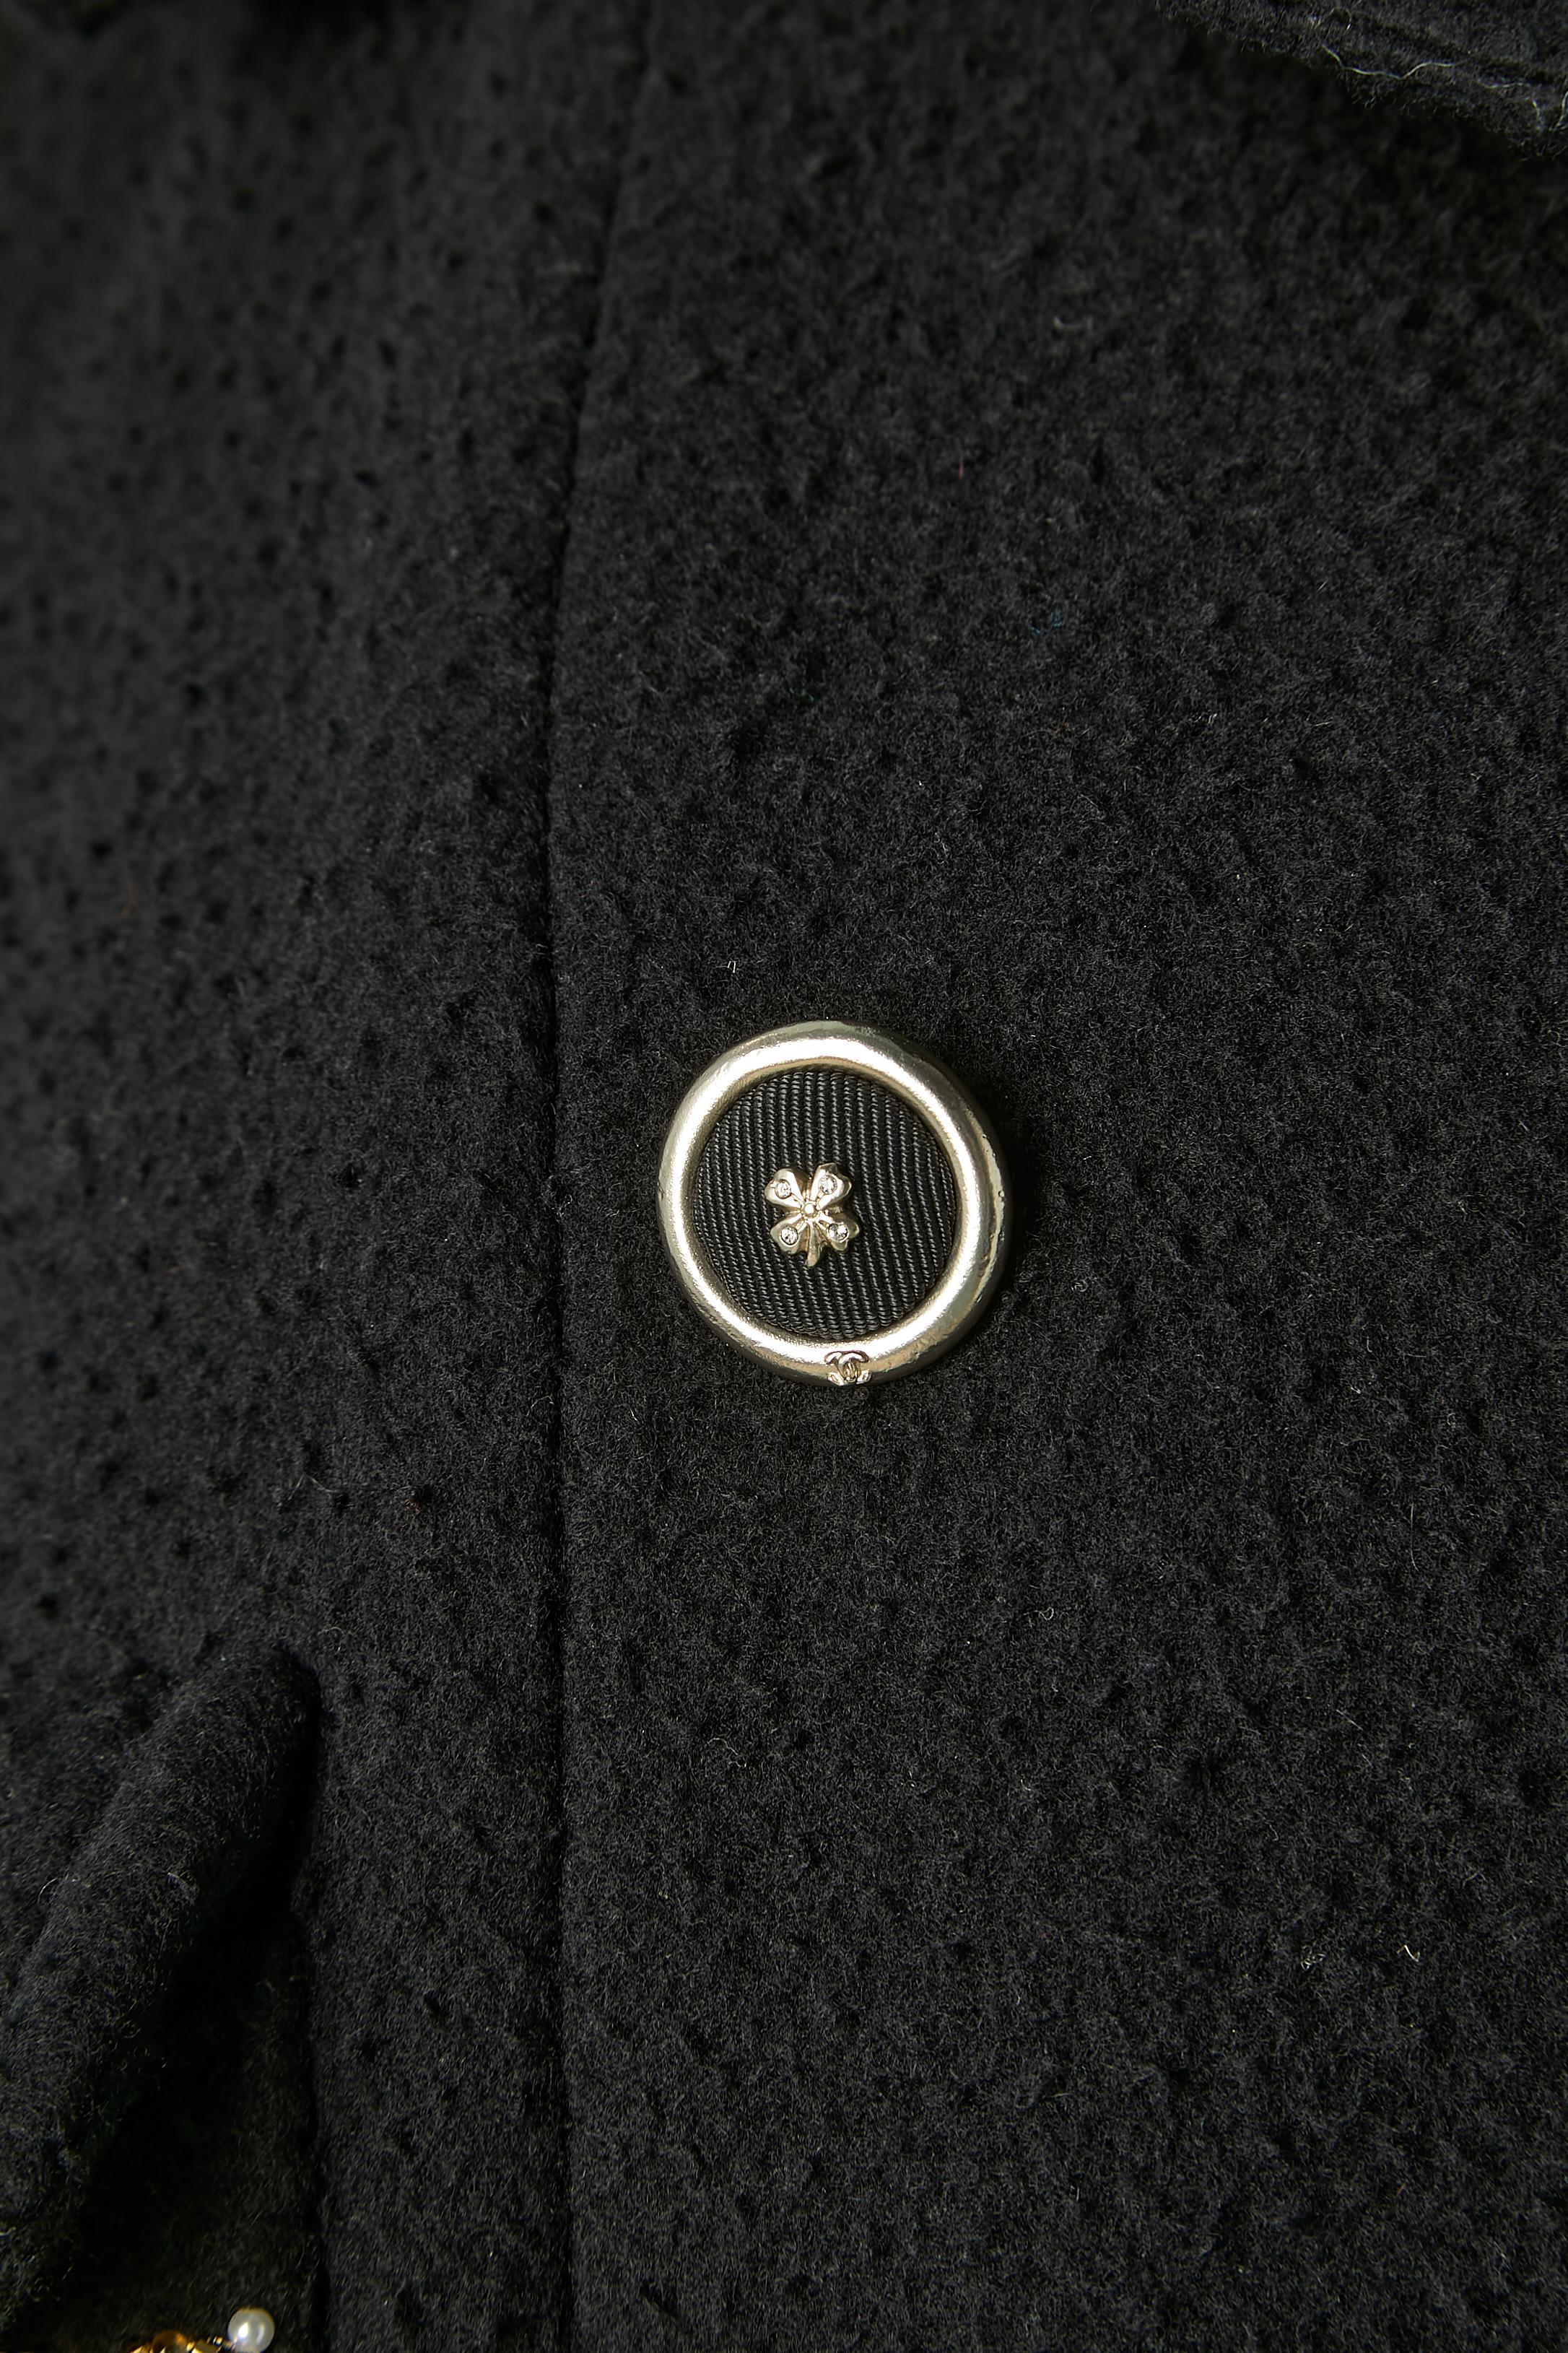 Black wool and cashmere double-breasted coat with embroideries ( rhinestone, gold leather and beads) on pockets. Main fabric composition: 50% wool, 30% cashmere, 20% polyamide. Silk lining. Branded buttons with clover on. 
Chanel SAMPLE / Collection